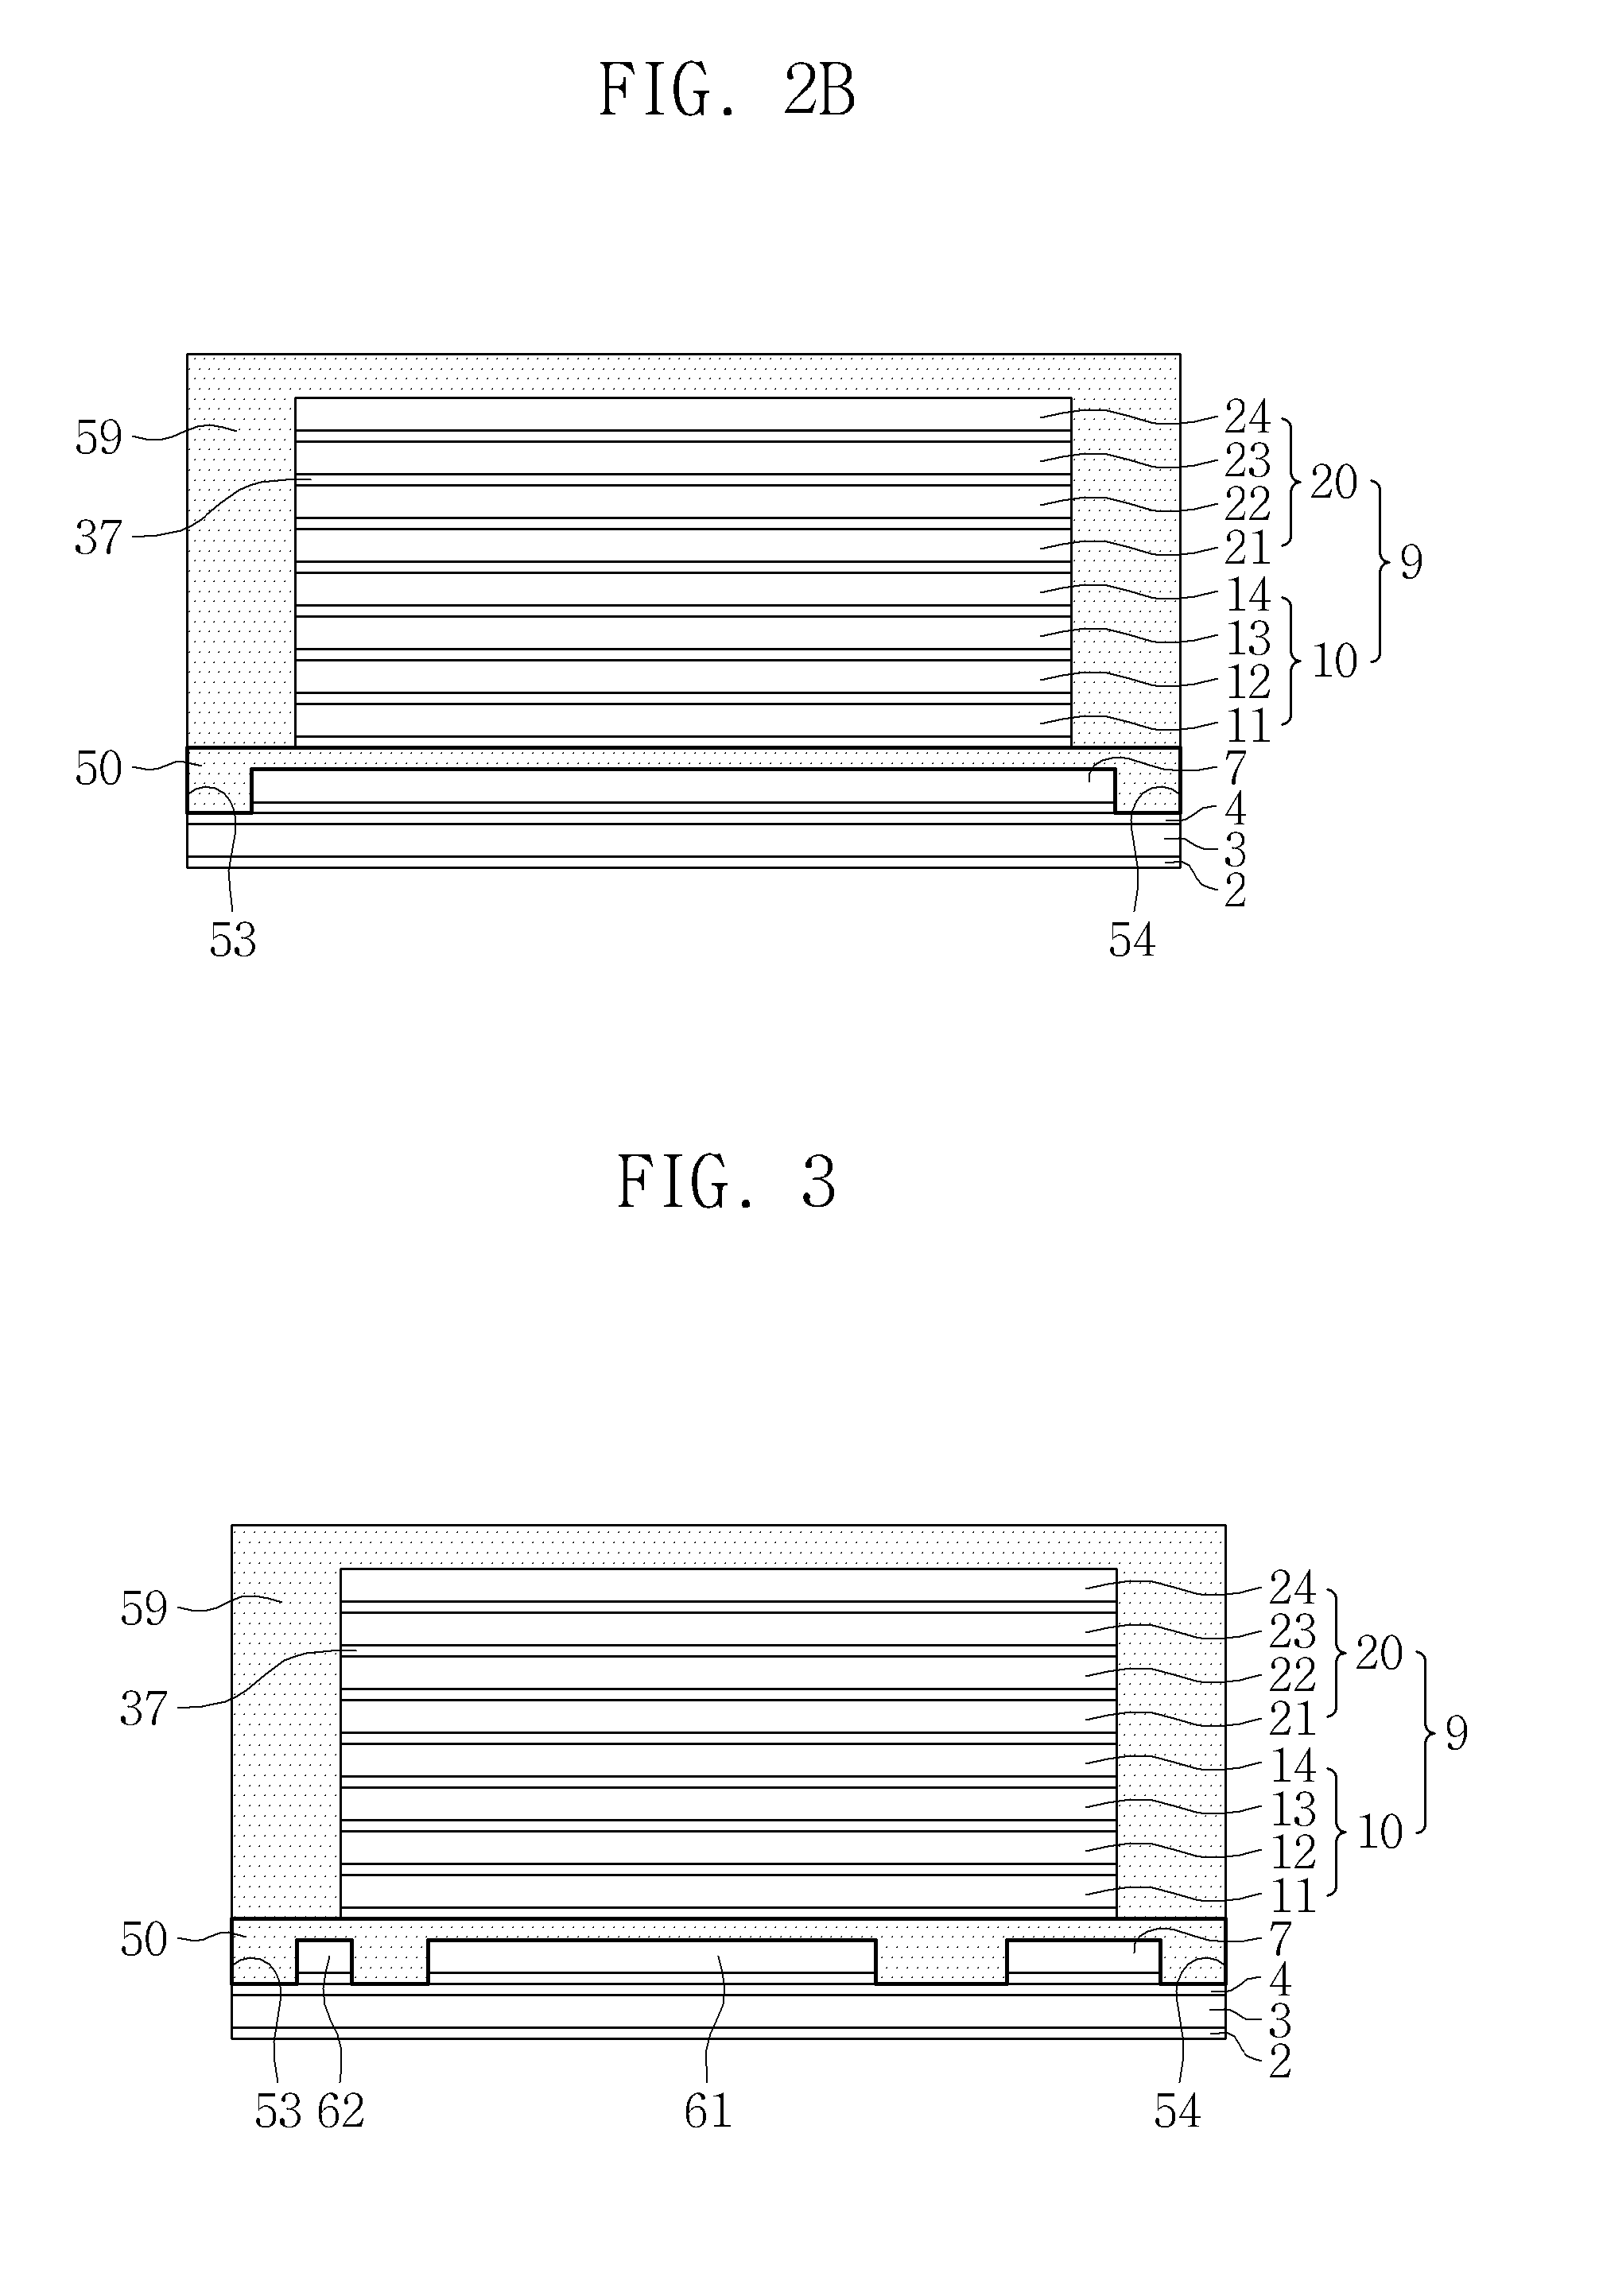 Semiconductor package having plural semiconductor chips and method of forming the same